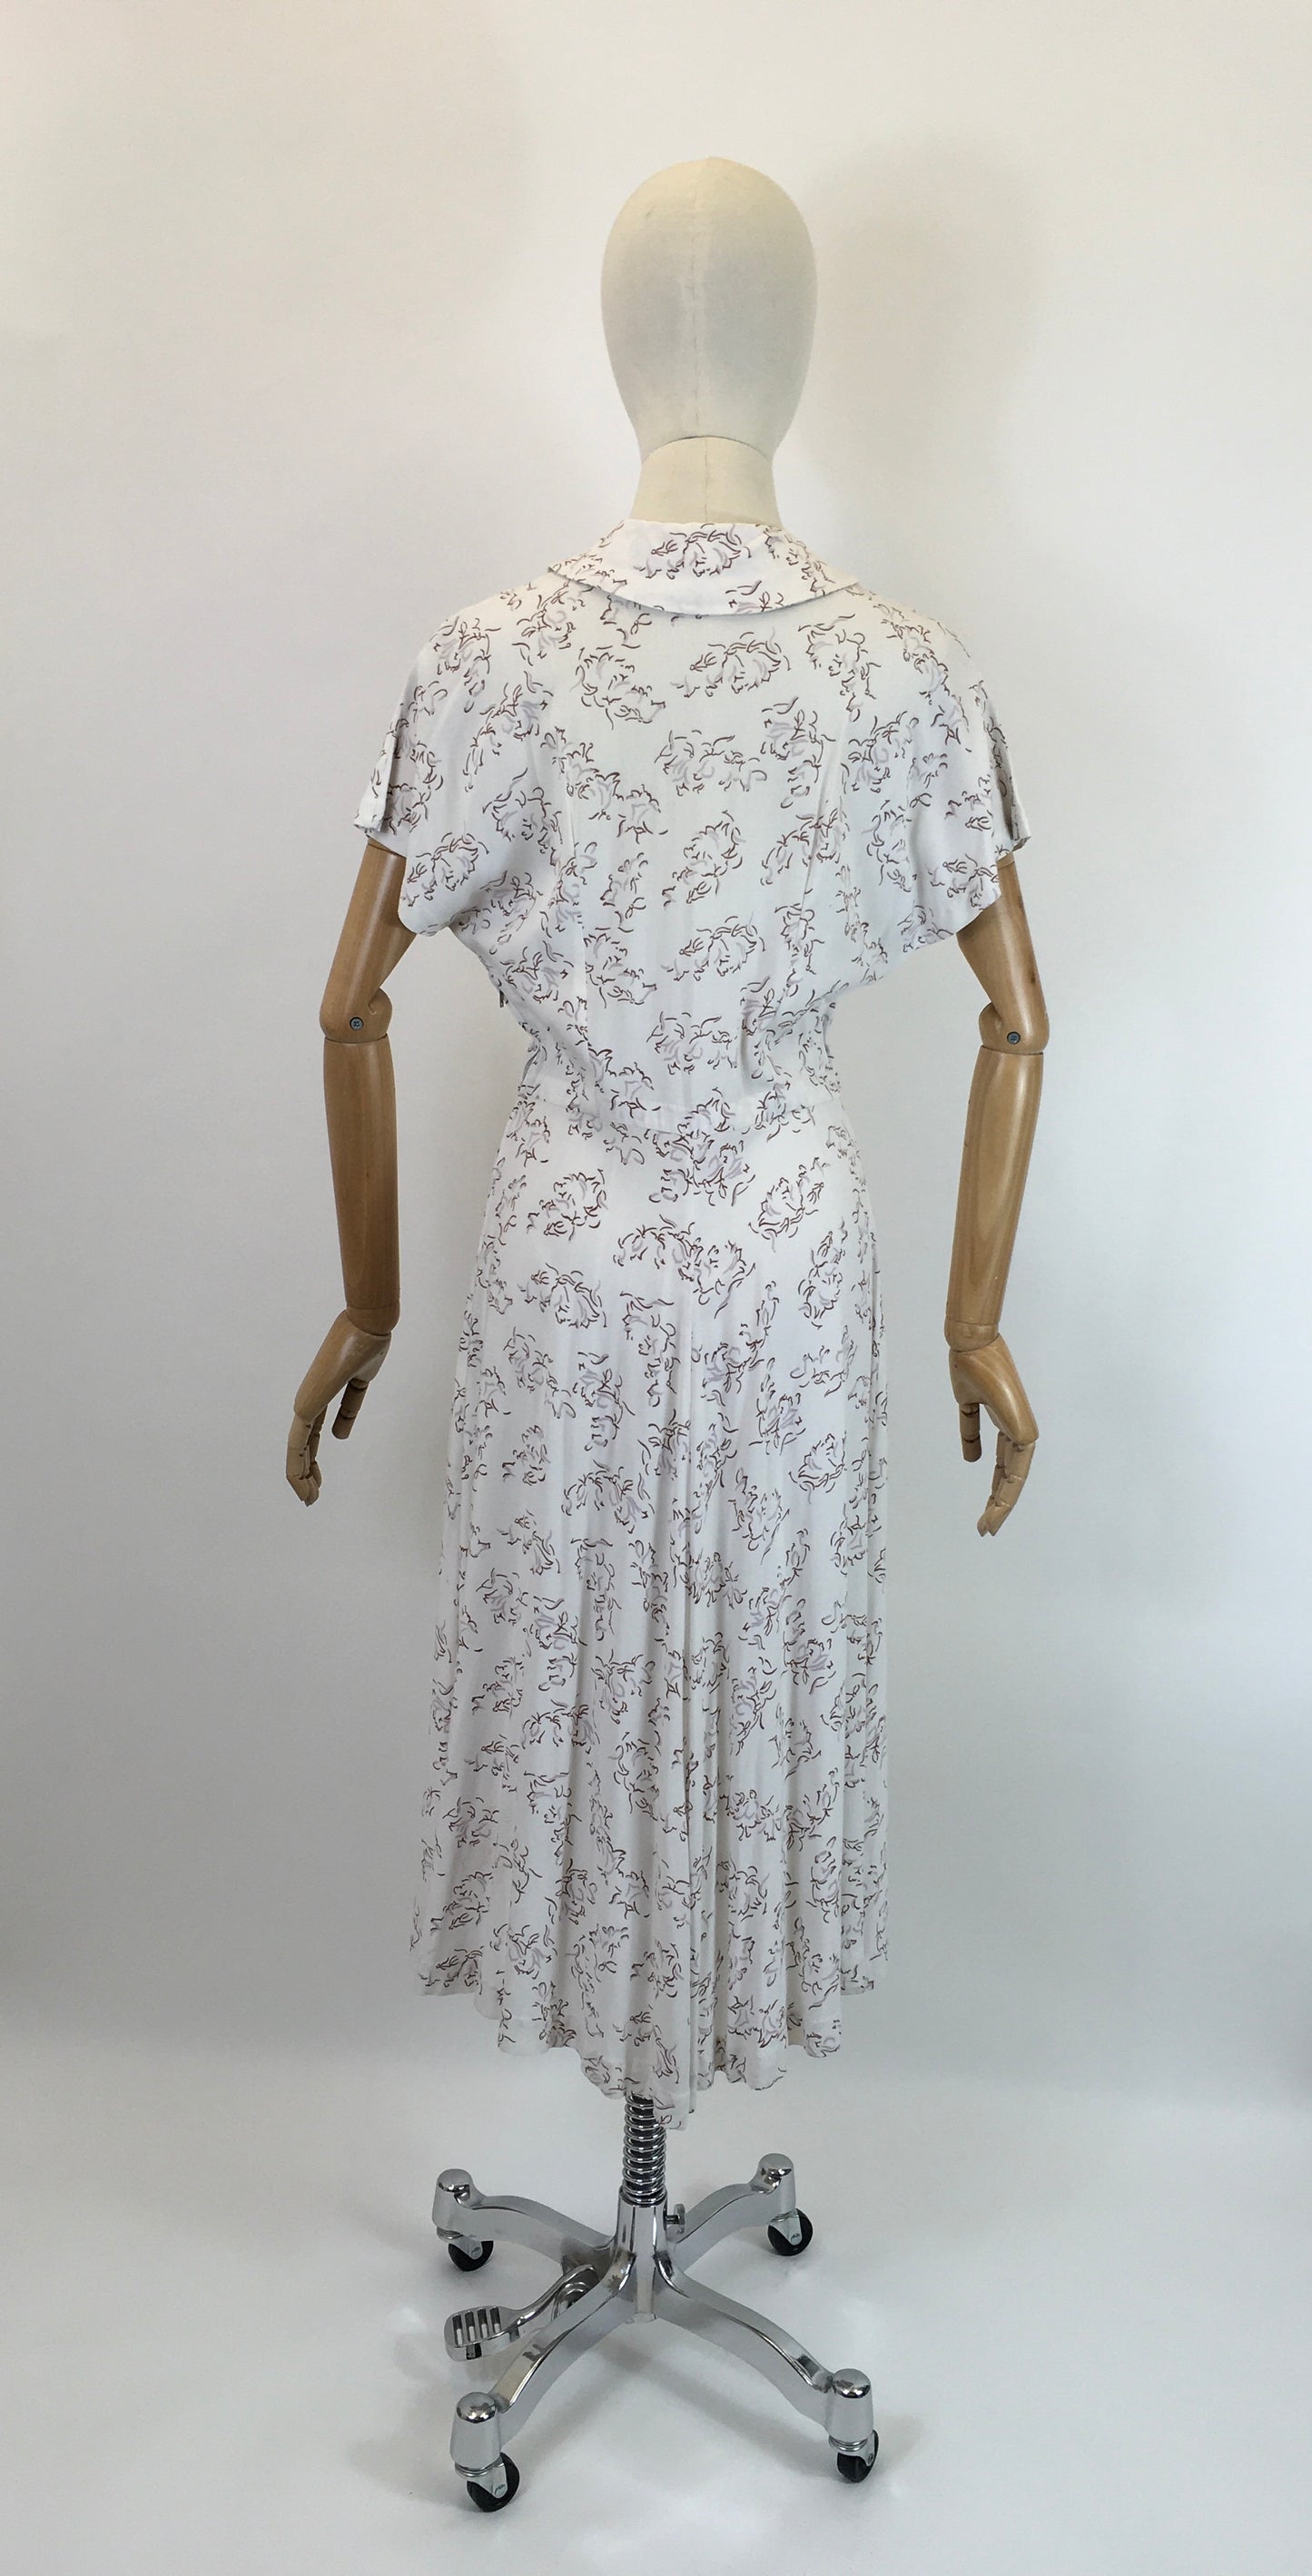 Original 1940’s Darling Cotton Day Dress - In White, Brown & Taupe Florals